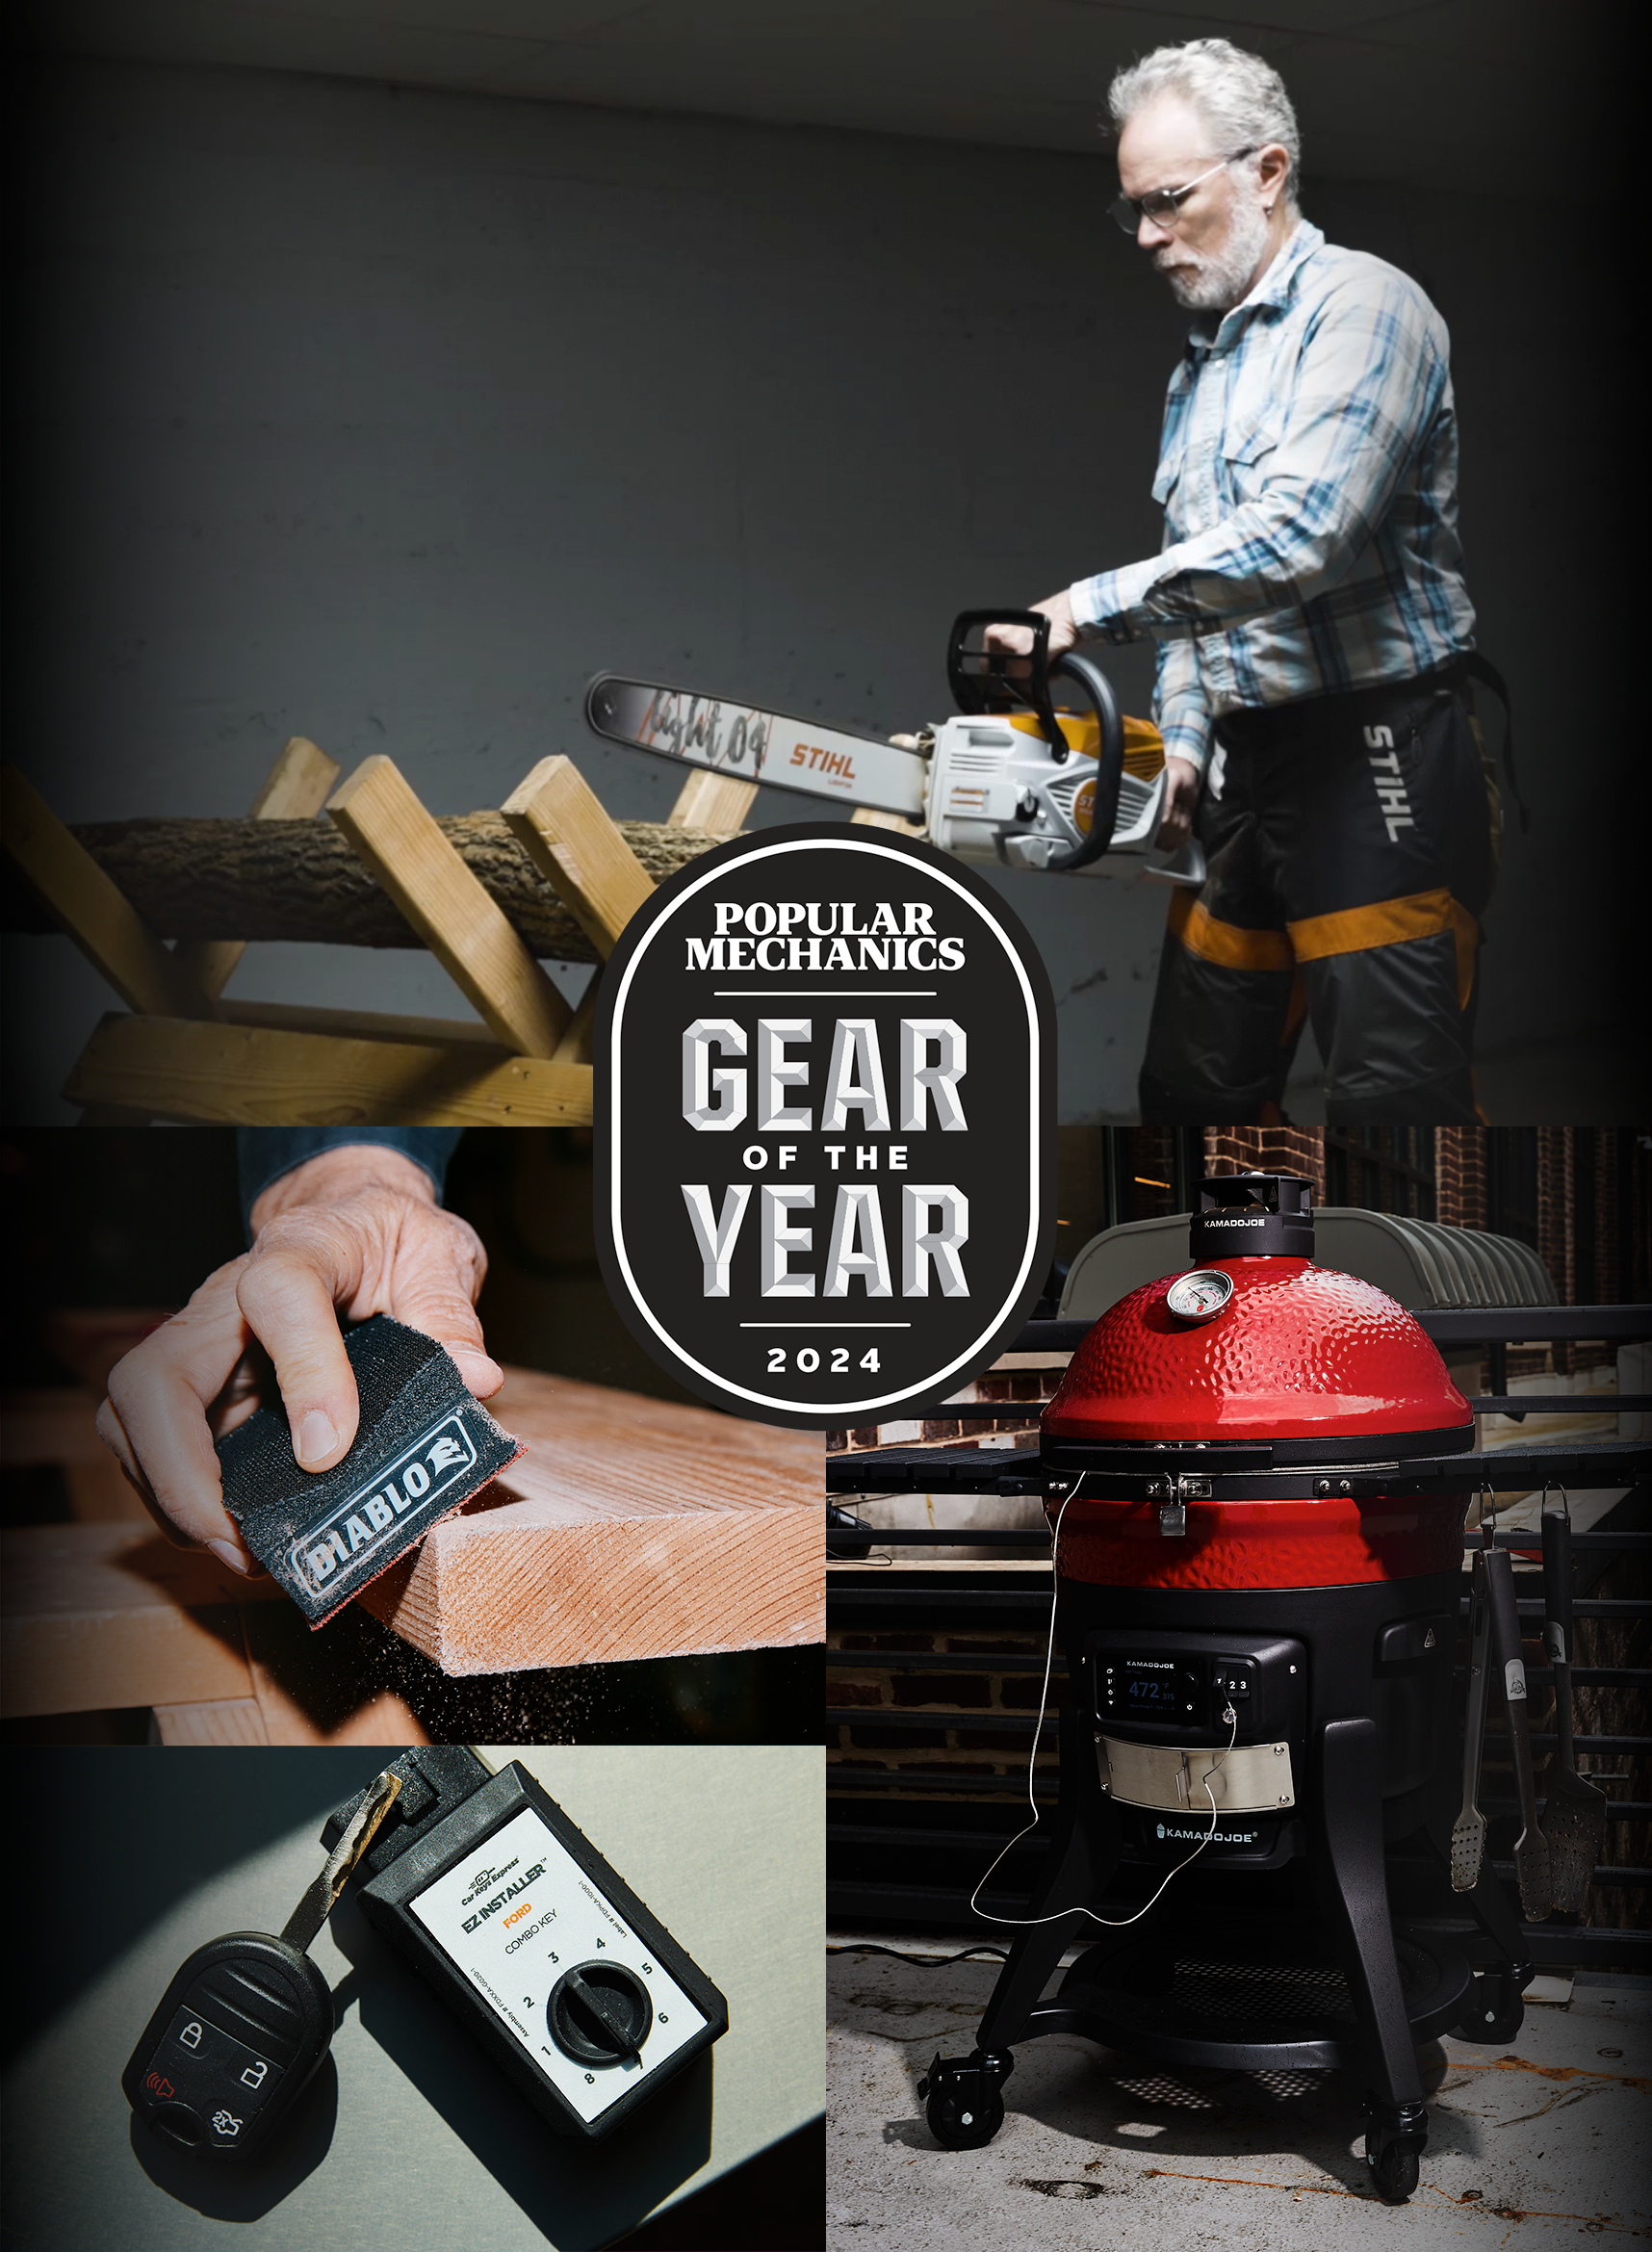 Gear of the Year